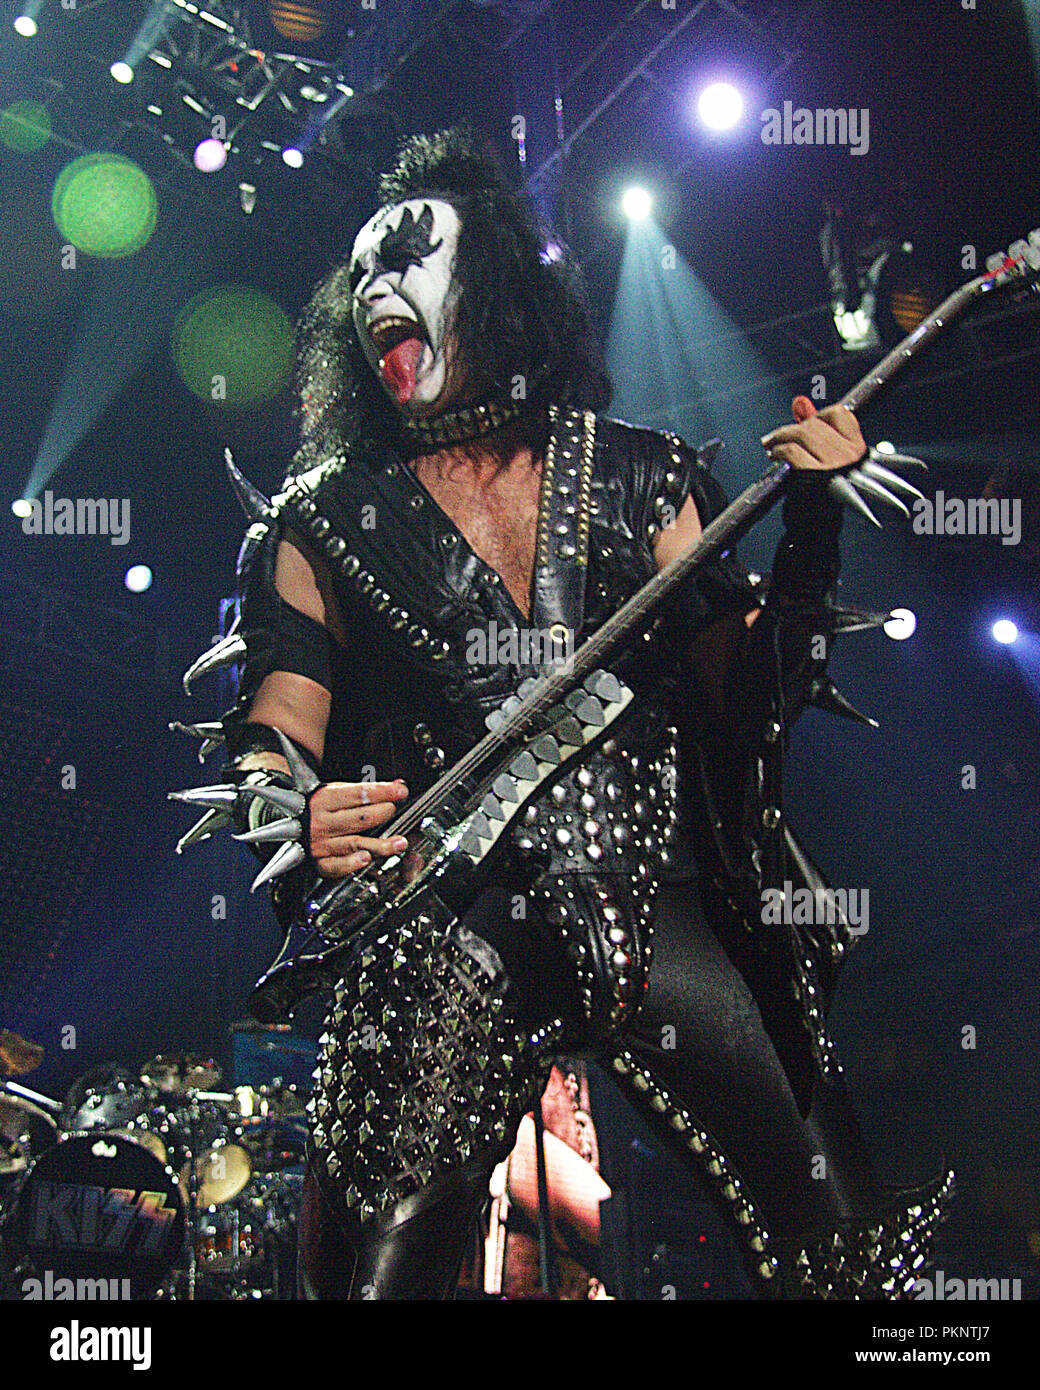 Gene Simmons of KISS performs at Thompson-Boling Arena in Knoxville, Tennessee on December 10, 2003. CREDIT: Chris McKay / MediaPunch Stock Photo